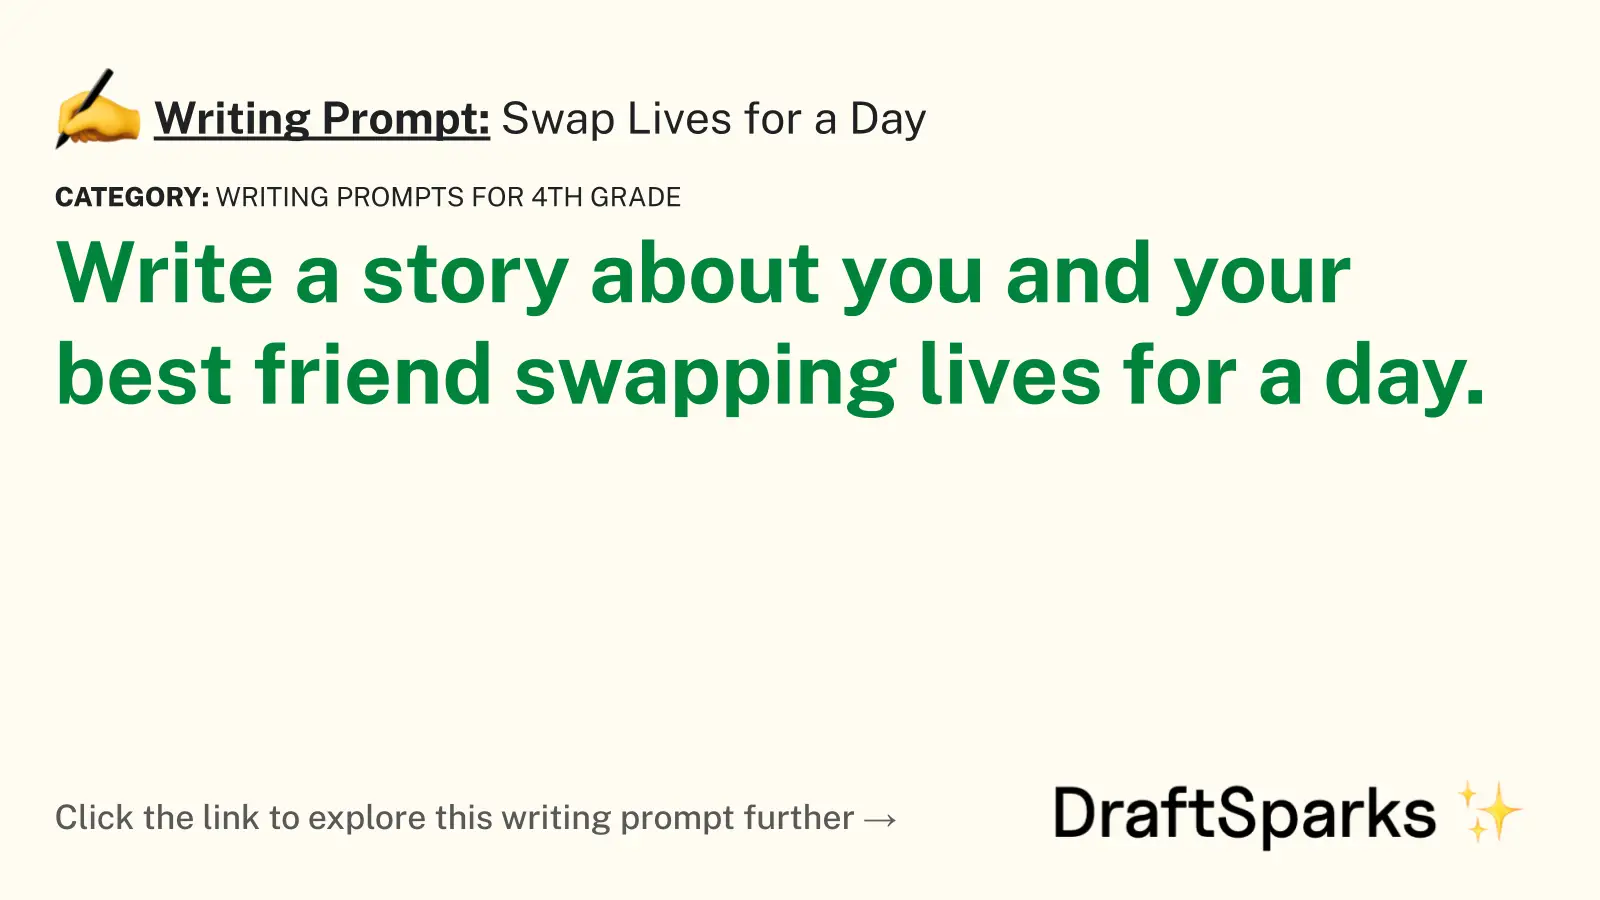 Swap Lives for a Day